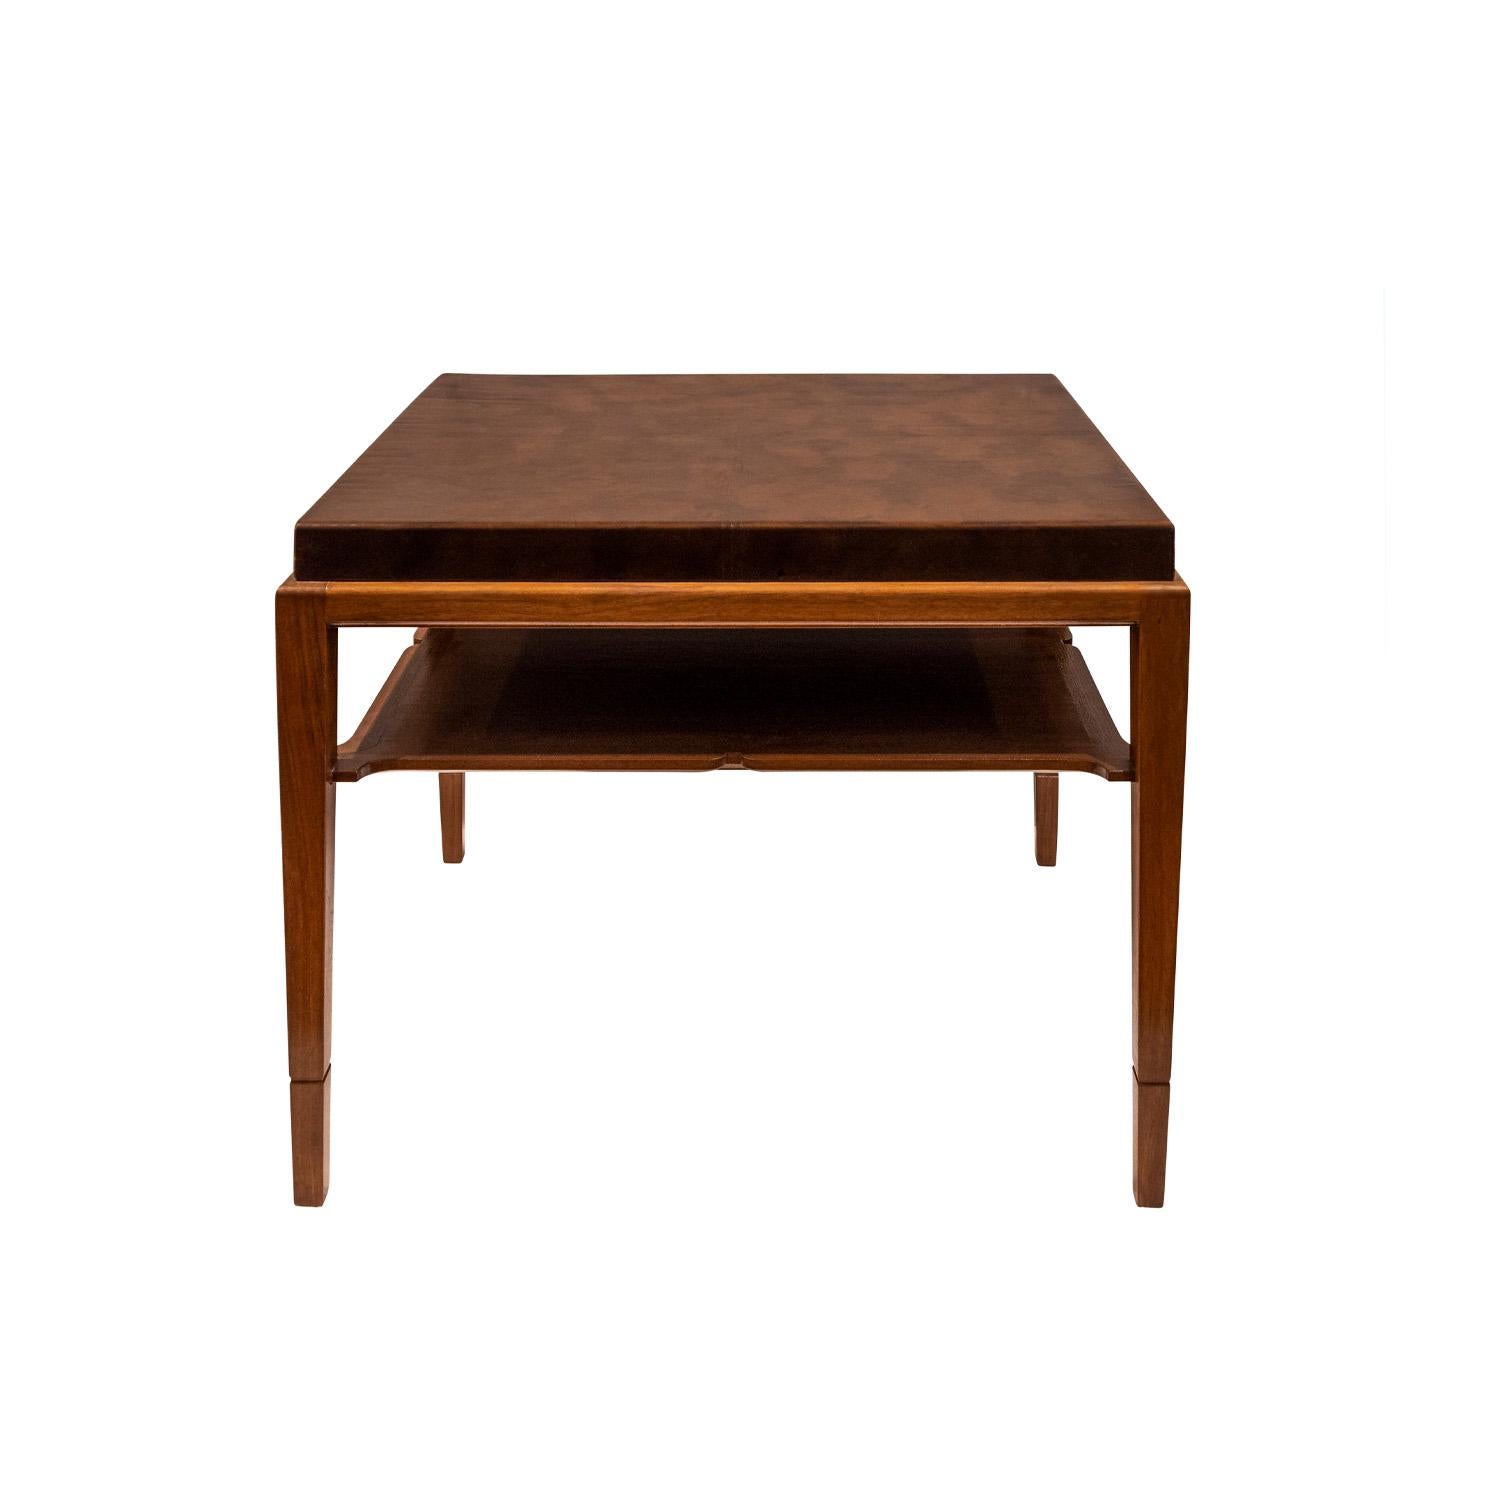 Hand-Crafted Tommi Parzinger Finely Crafted Pair of Mahogany Tables with Leather Tops 1940s For Sale